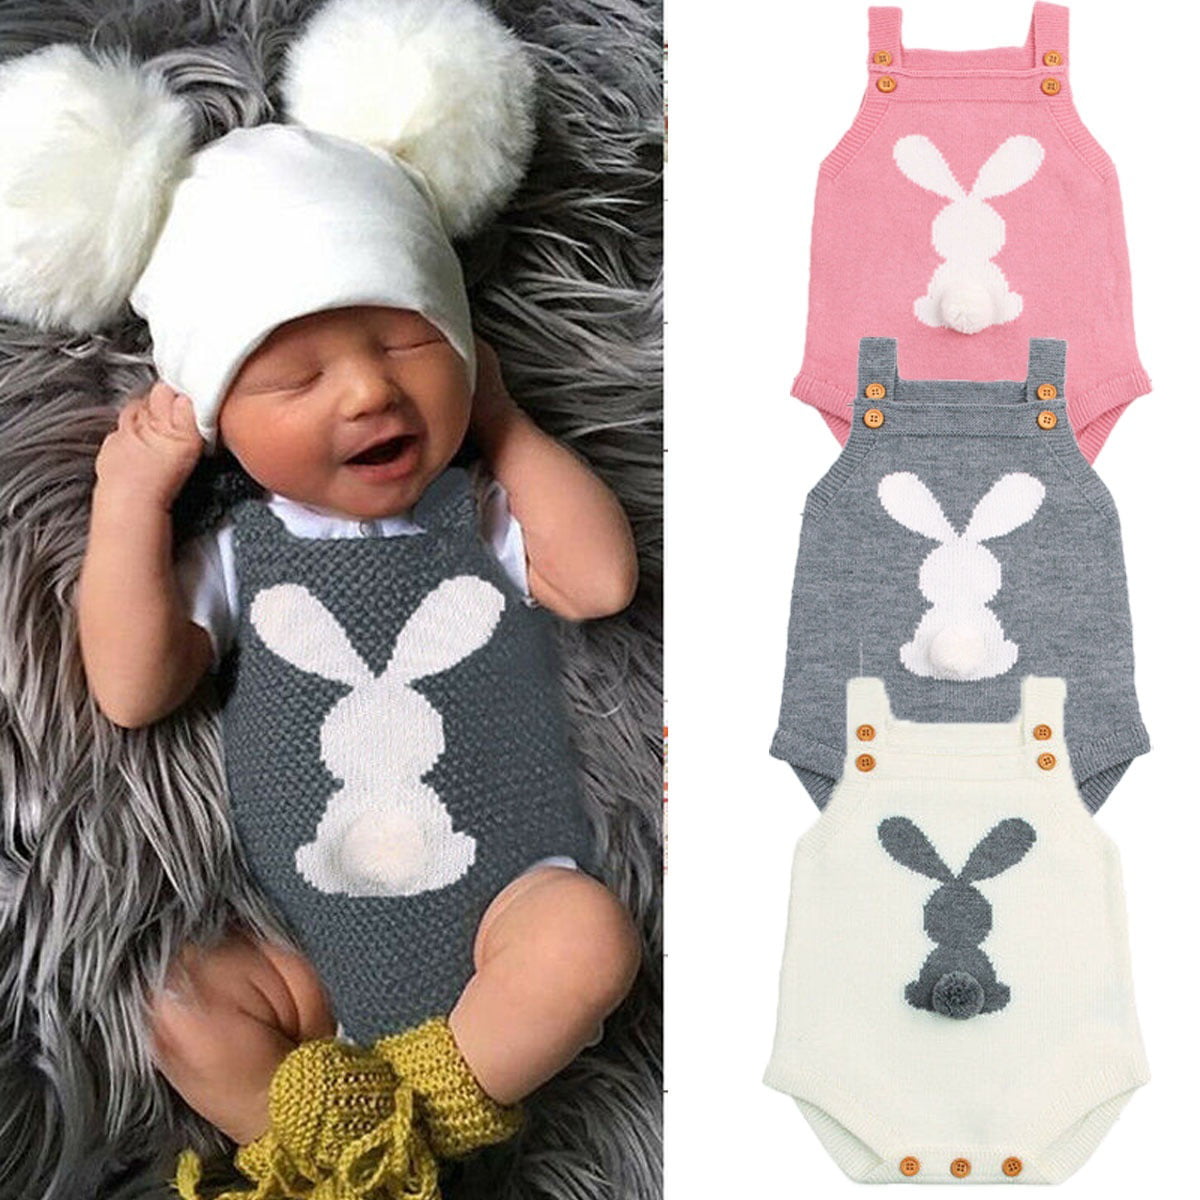 Newborn Cute Baby Girl Boy Knitted Infant Overall Bodysuit Clothes Outfit Romper 